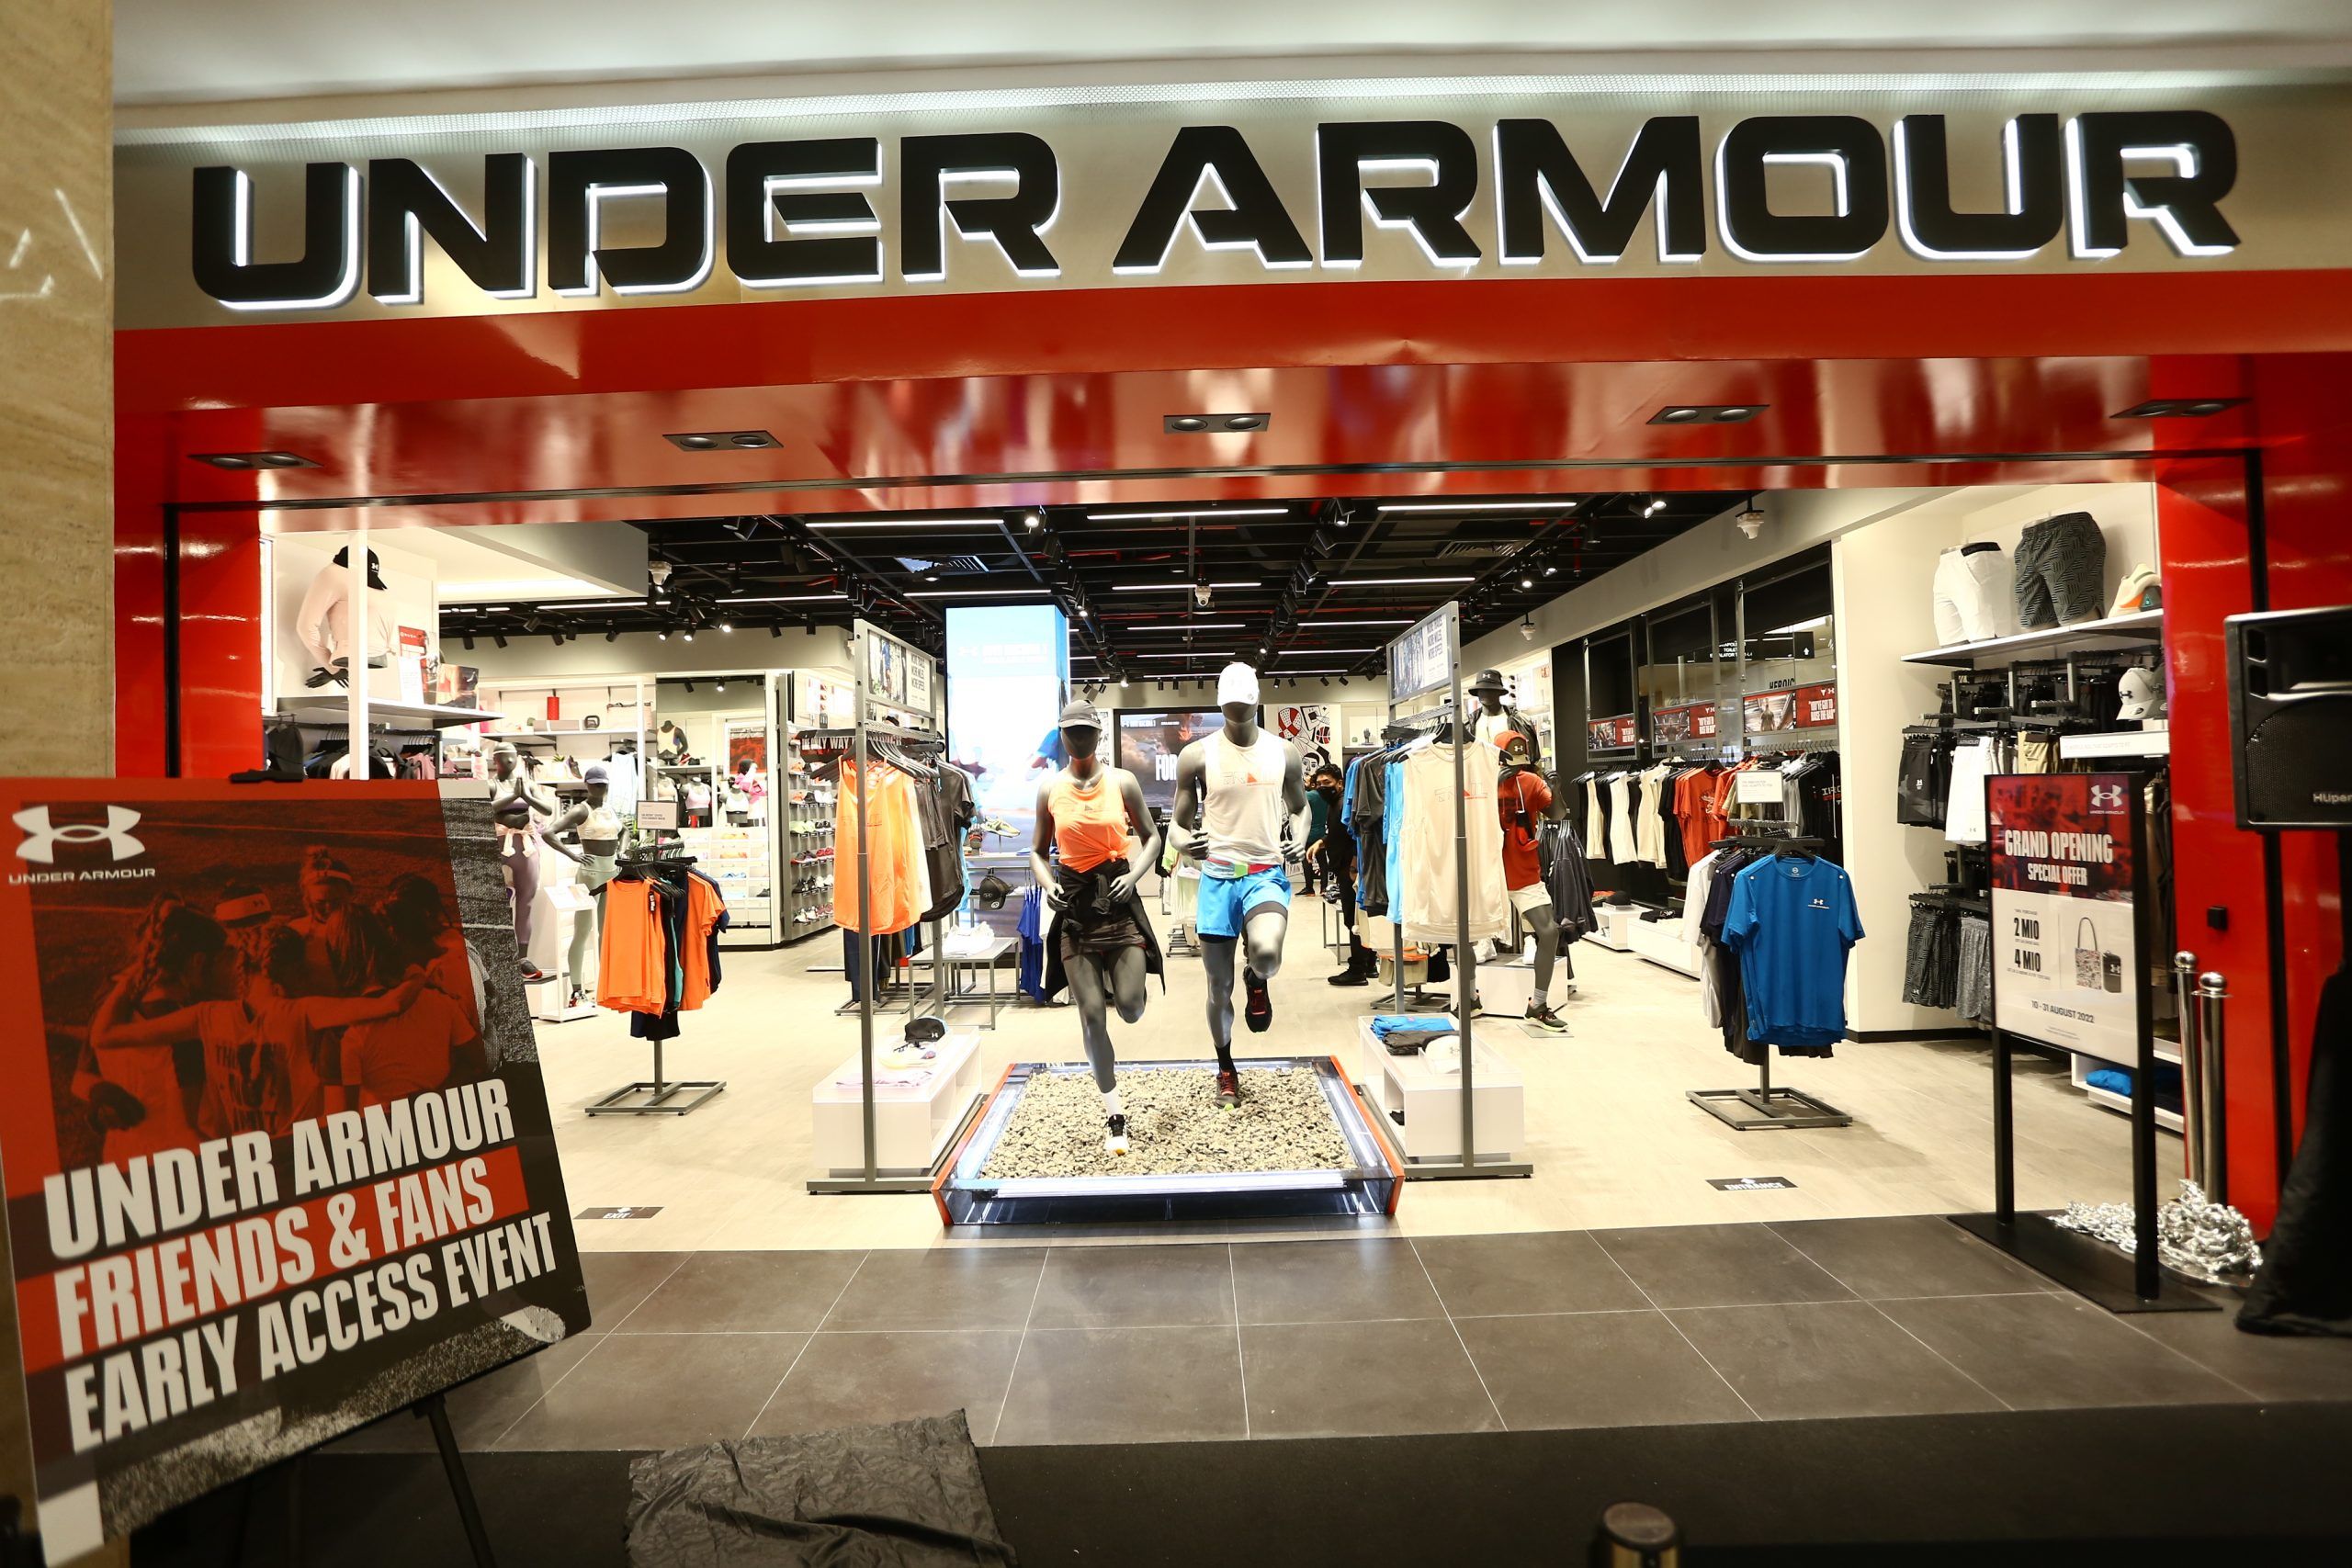 Under Armour presents its second Brand House City Concept Outlet in Indonesia